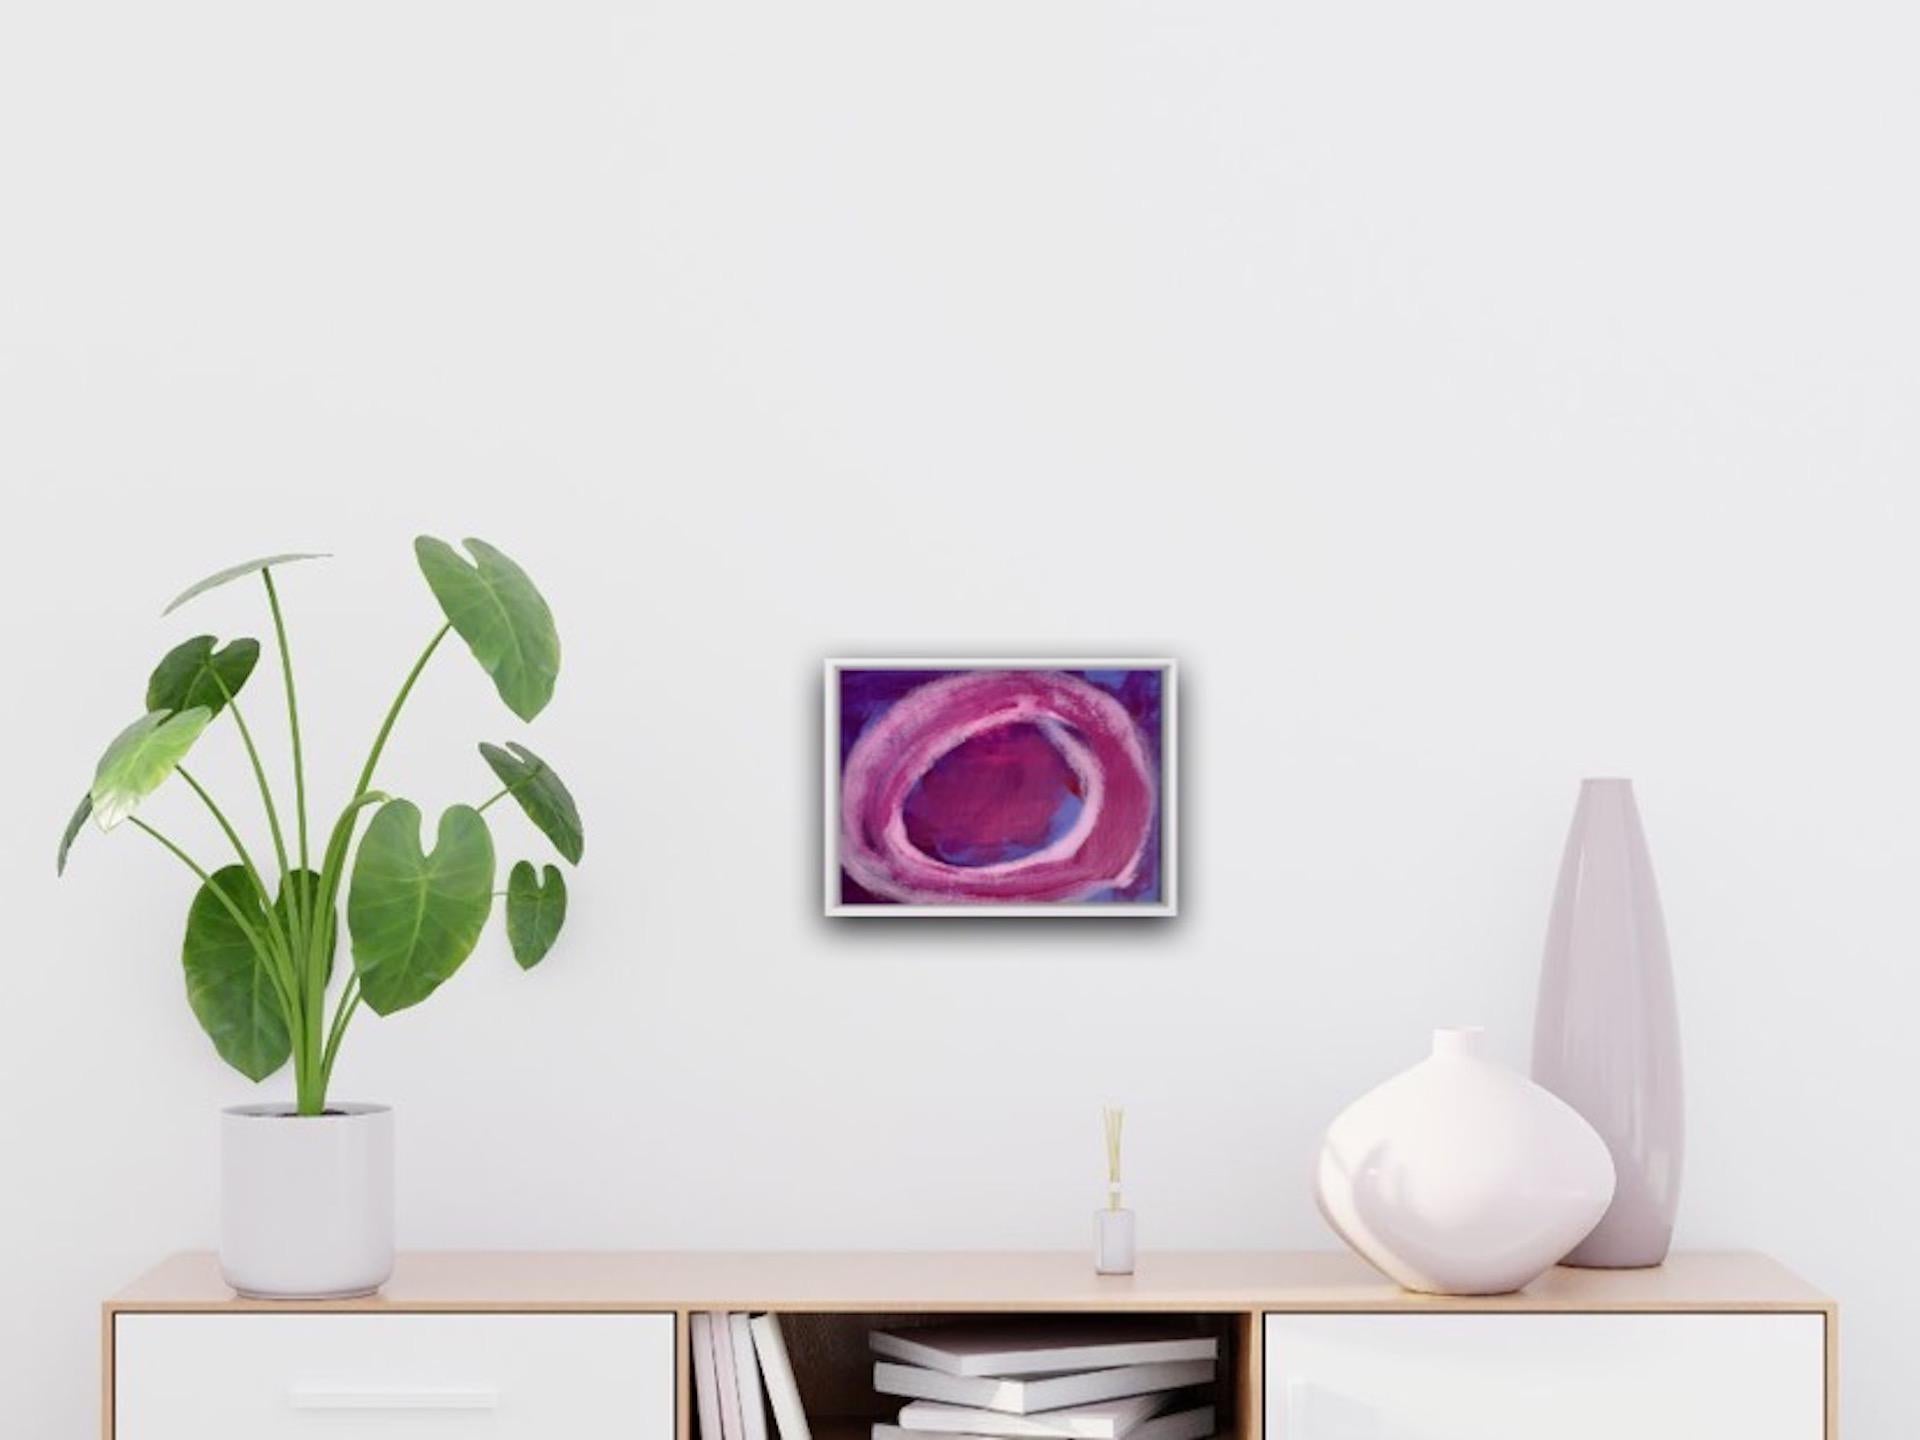 Julia Craig
Rosa
Acrylic on paper
Size: H14.5cm x W19.5cm
Sold Unframed
(Please note that in situ images are purely an indication of how a piece may look).

Julia is an abstract artist whose love of colour is clearly apparent in her vibrant work.